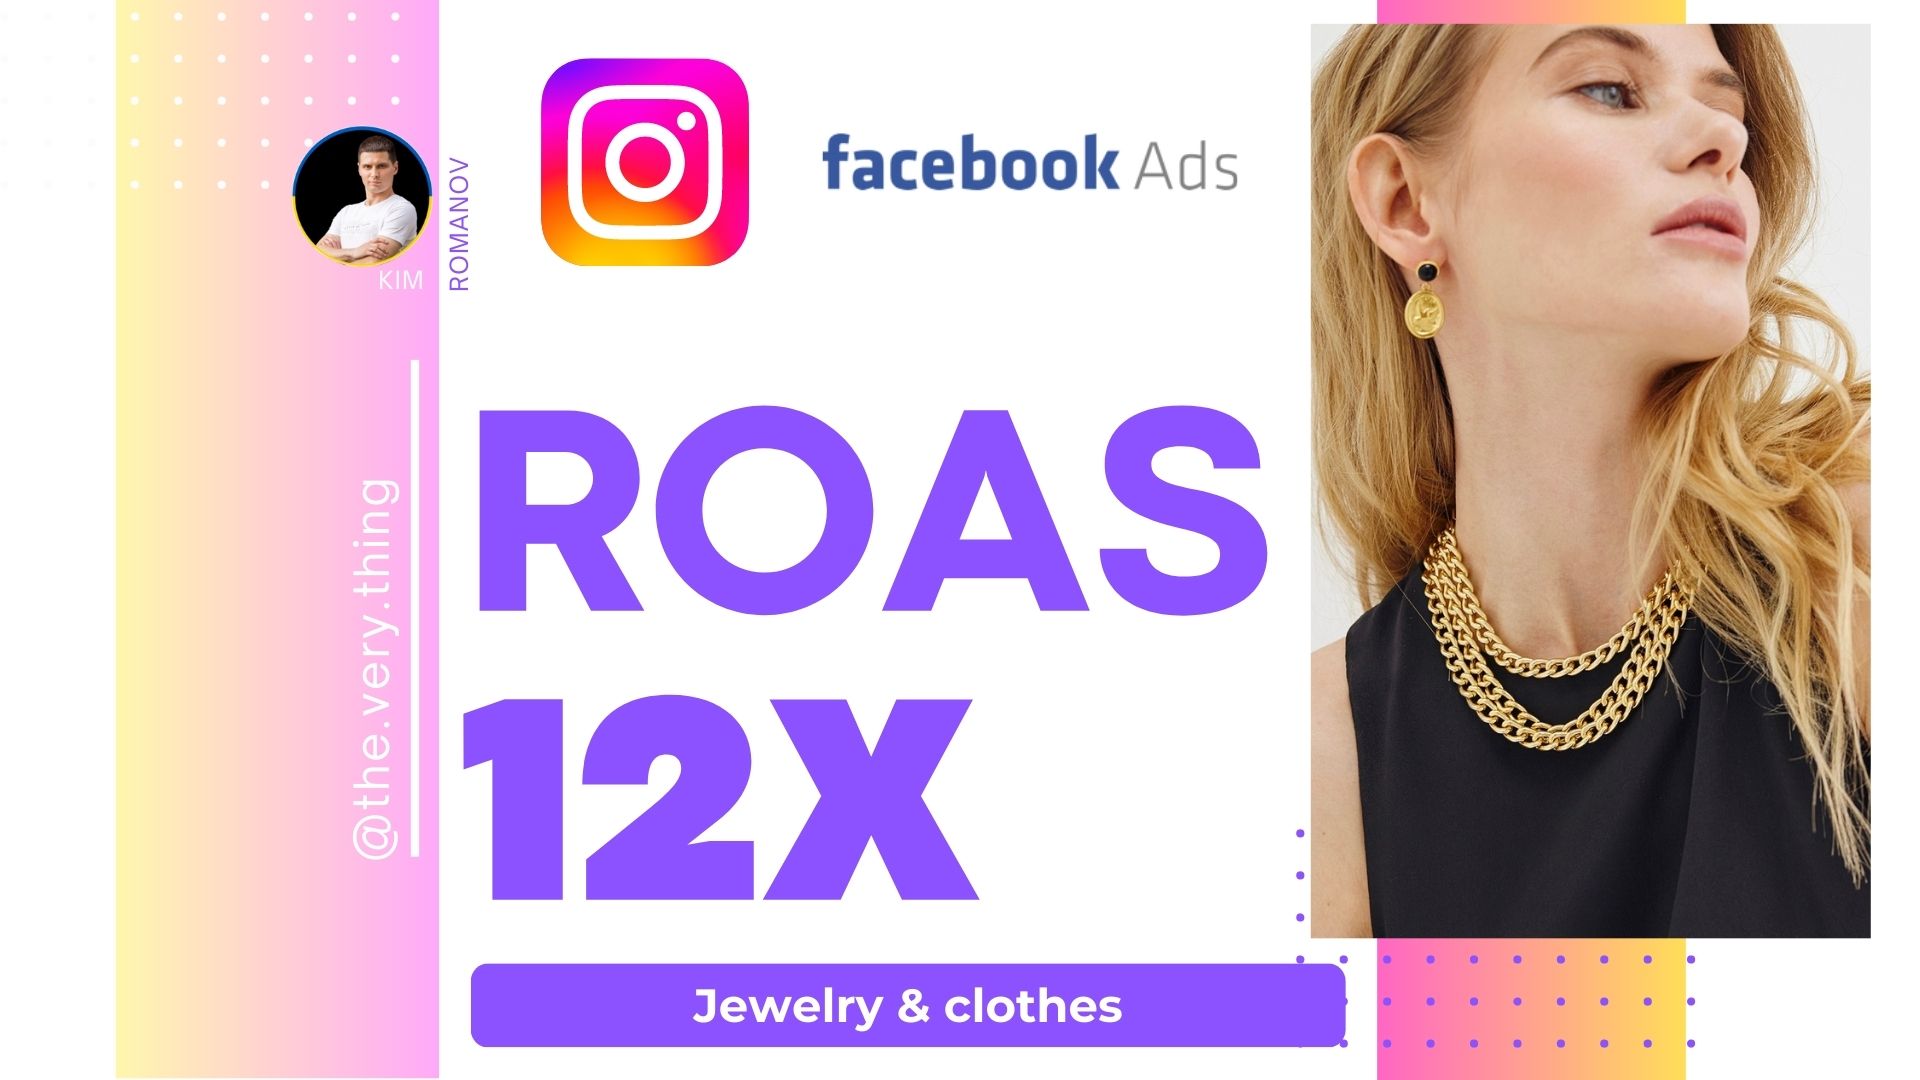 Facebook and Instagram Ads Campaign Generates Impressive ROI for Jewelry & clothes store